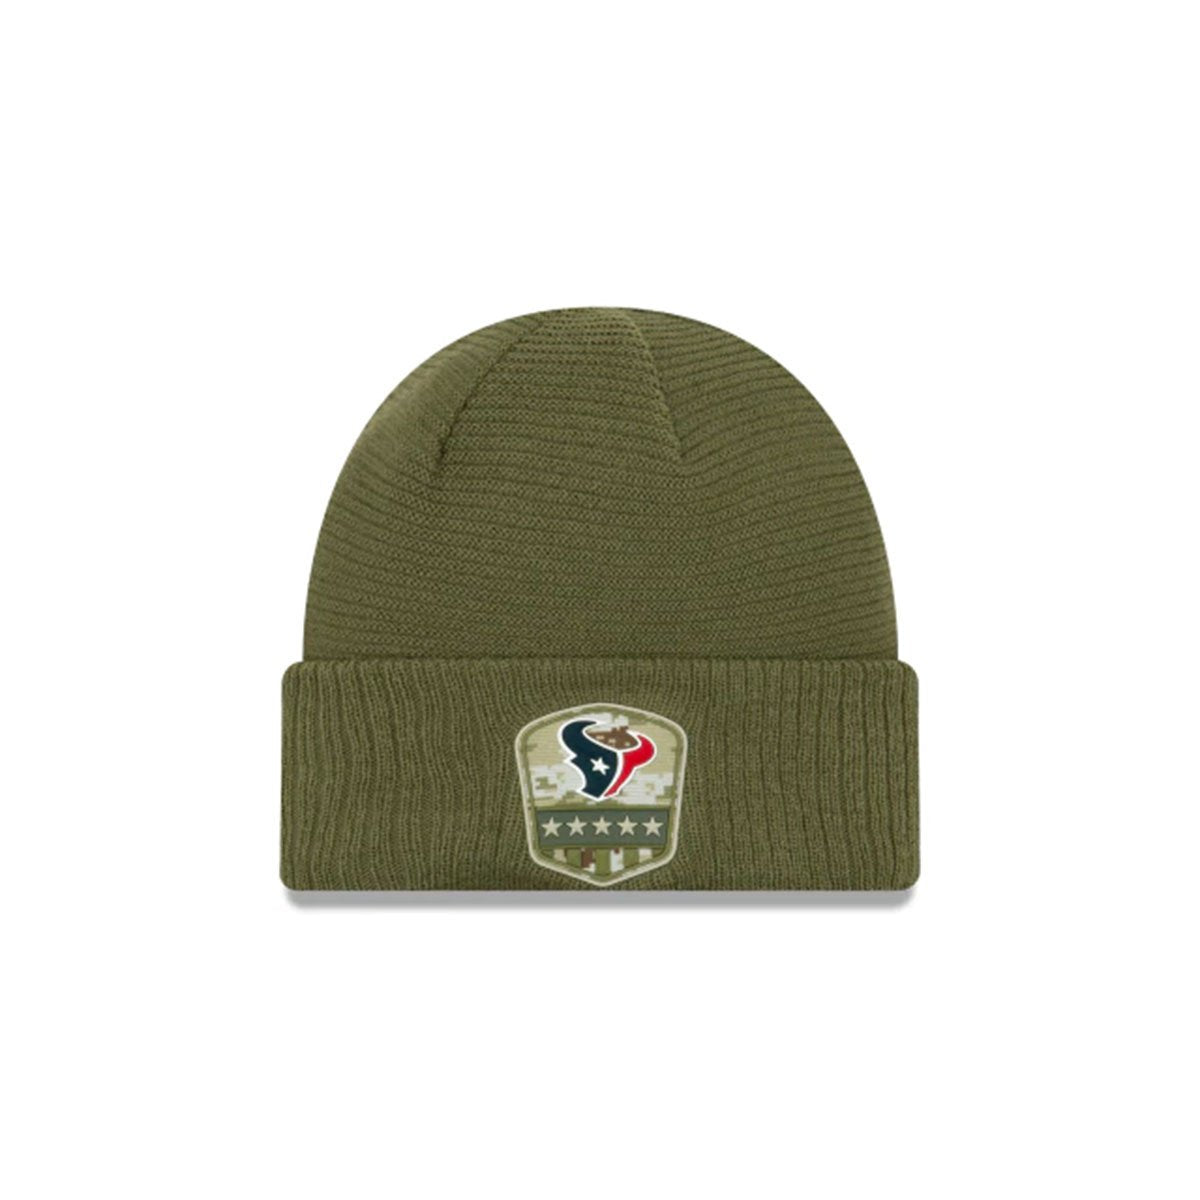 HOUSTON TEXANS SALUTE TO SERVICE CUFF KNIT GREEN/BLUE